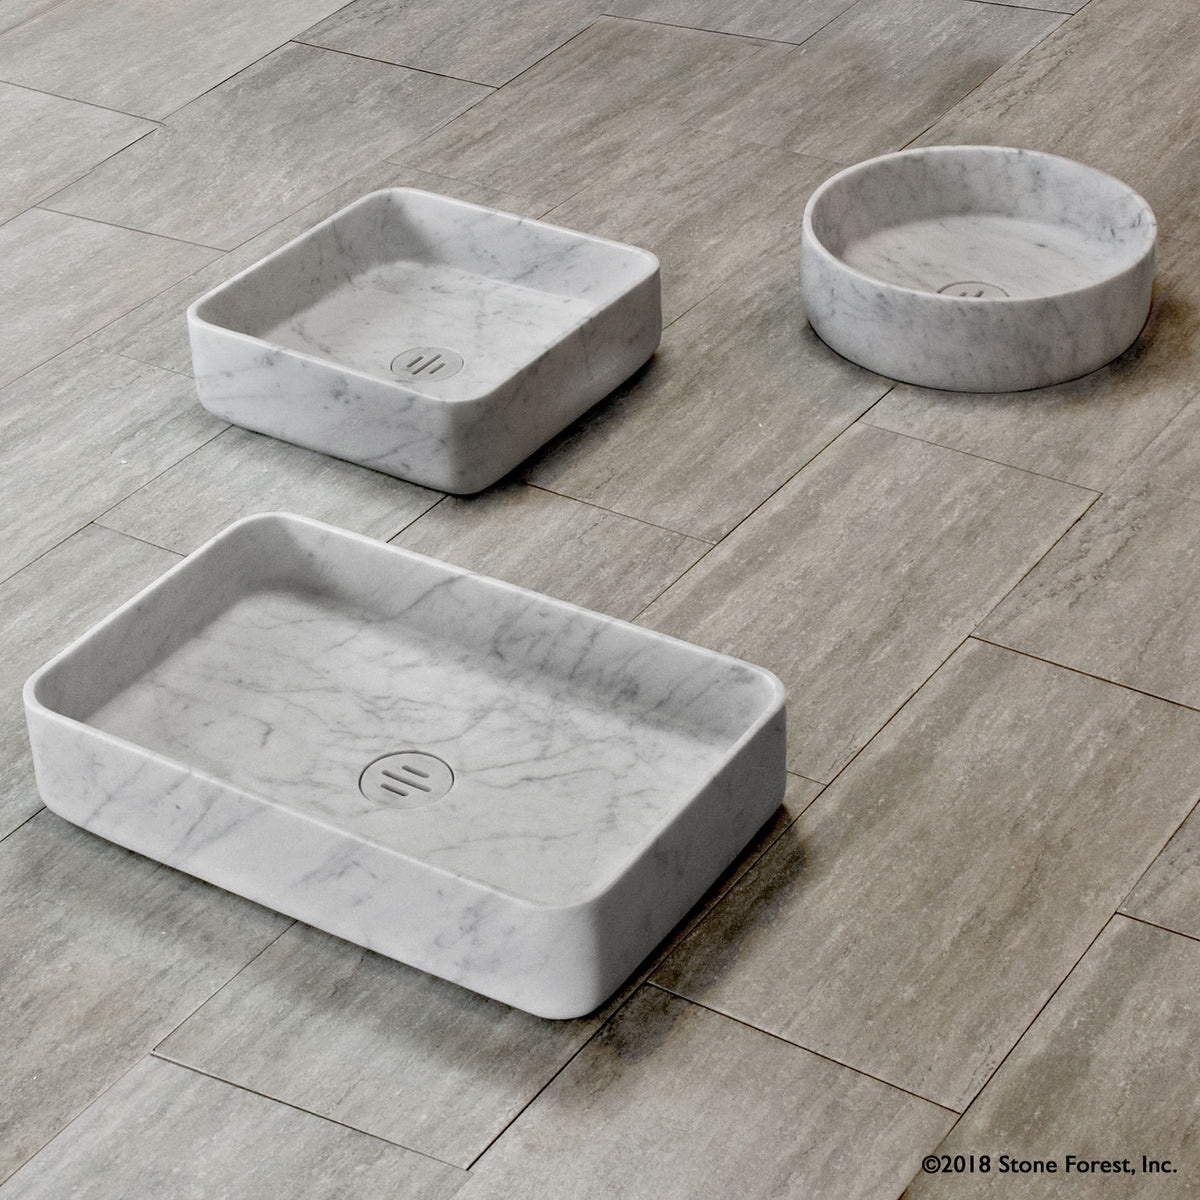 Contour Vessel Sinks in carrara marble. Shaped as square, round or rectangular sinks . image 4 of 6